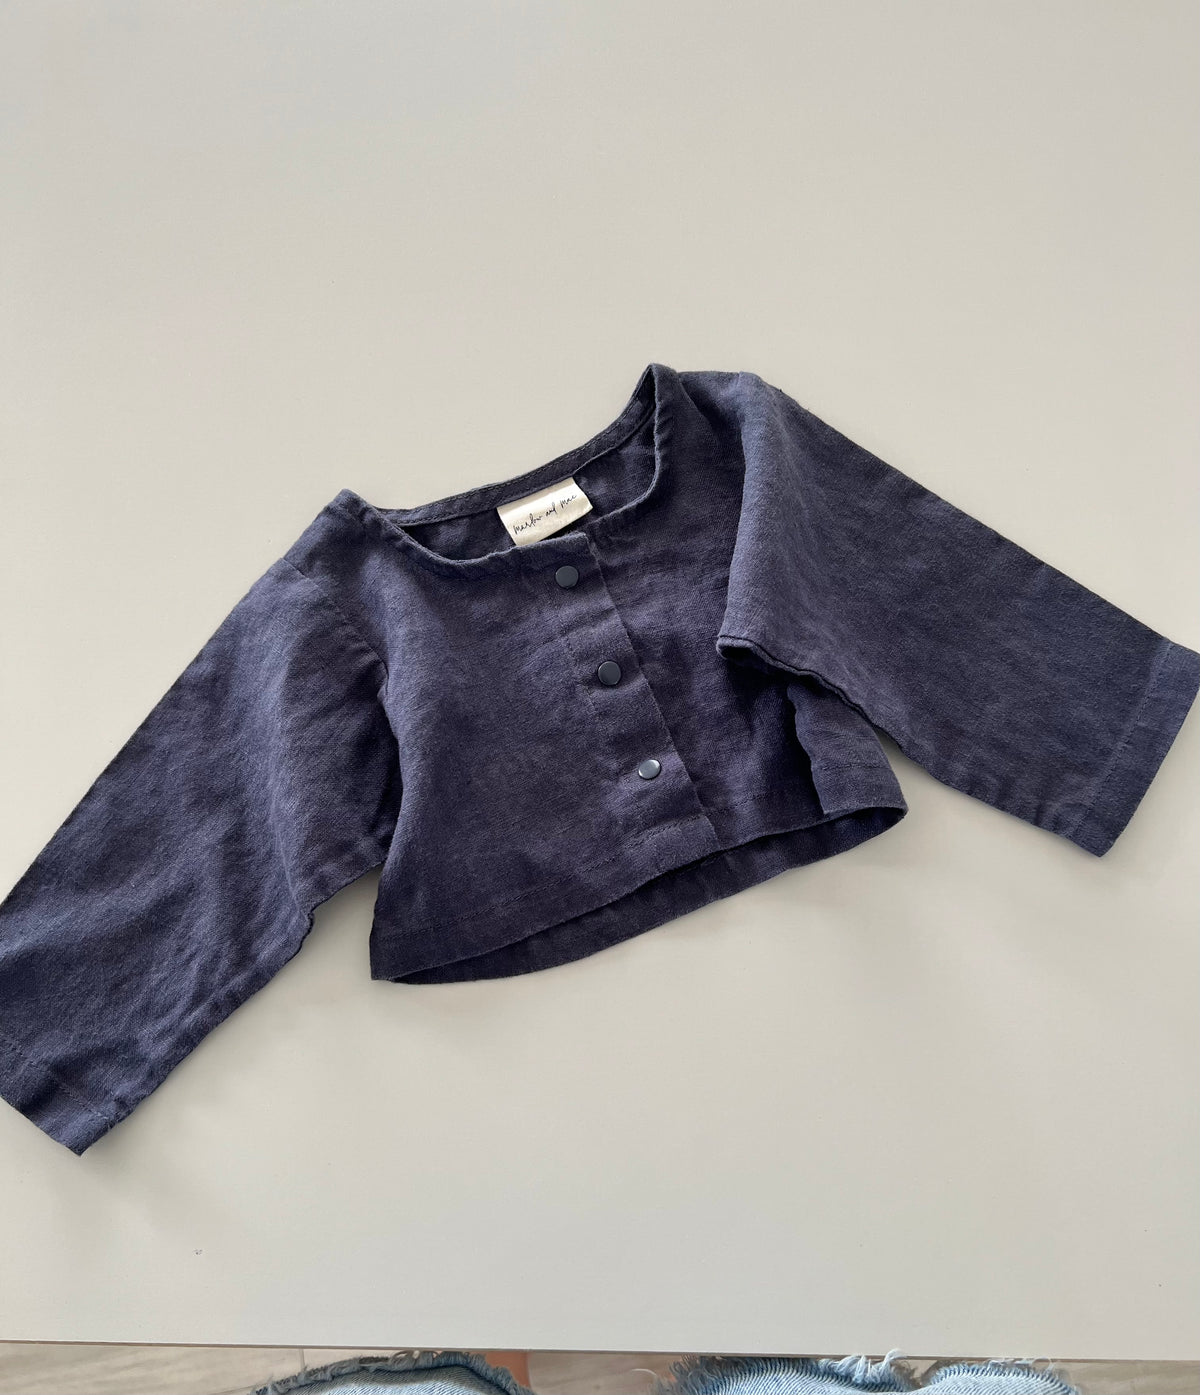 Linen long sleeved top in navy (sold out style)